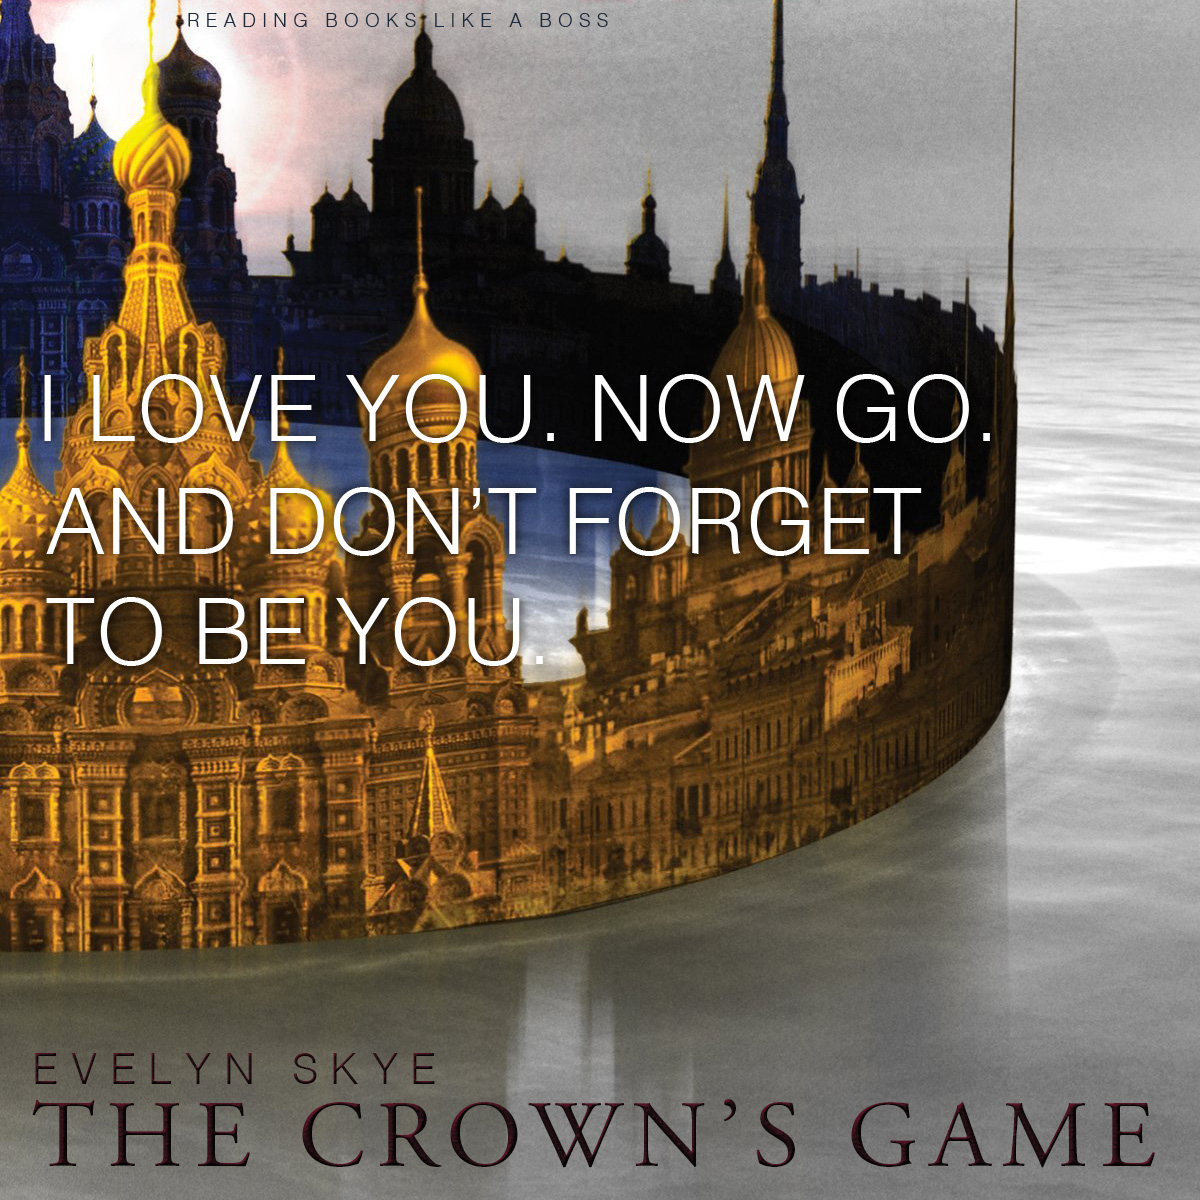 The Crown's Game by Evelyn Skye